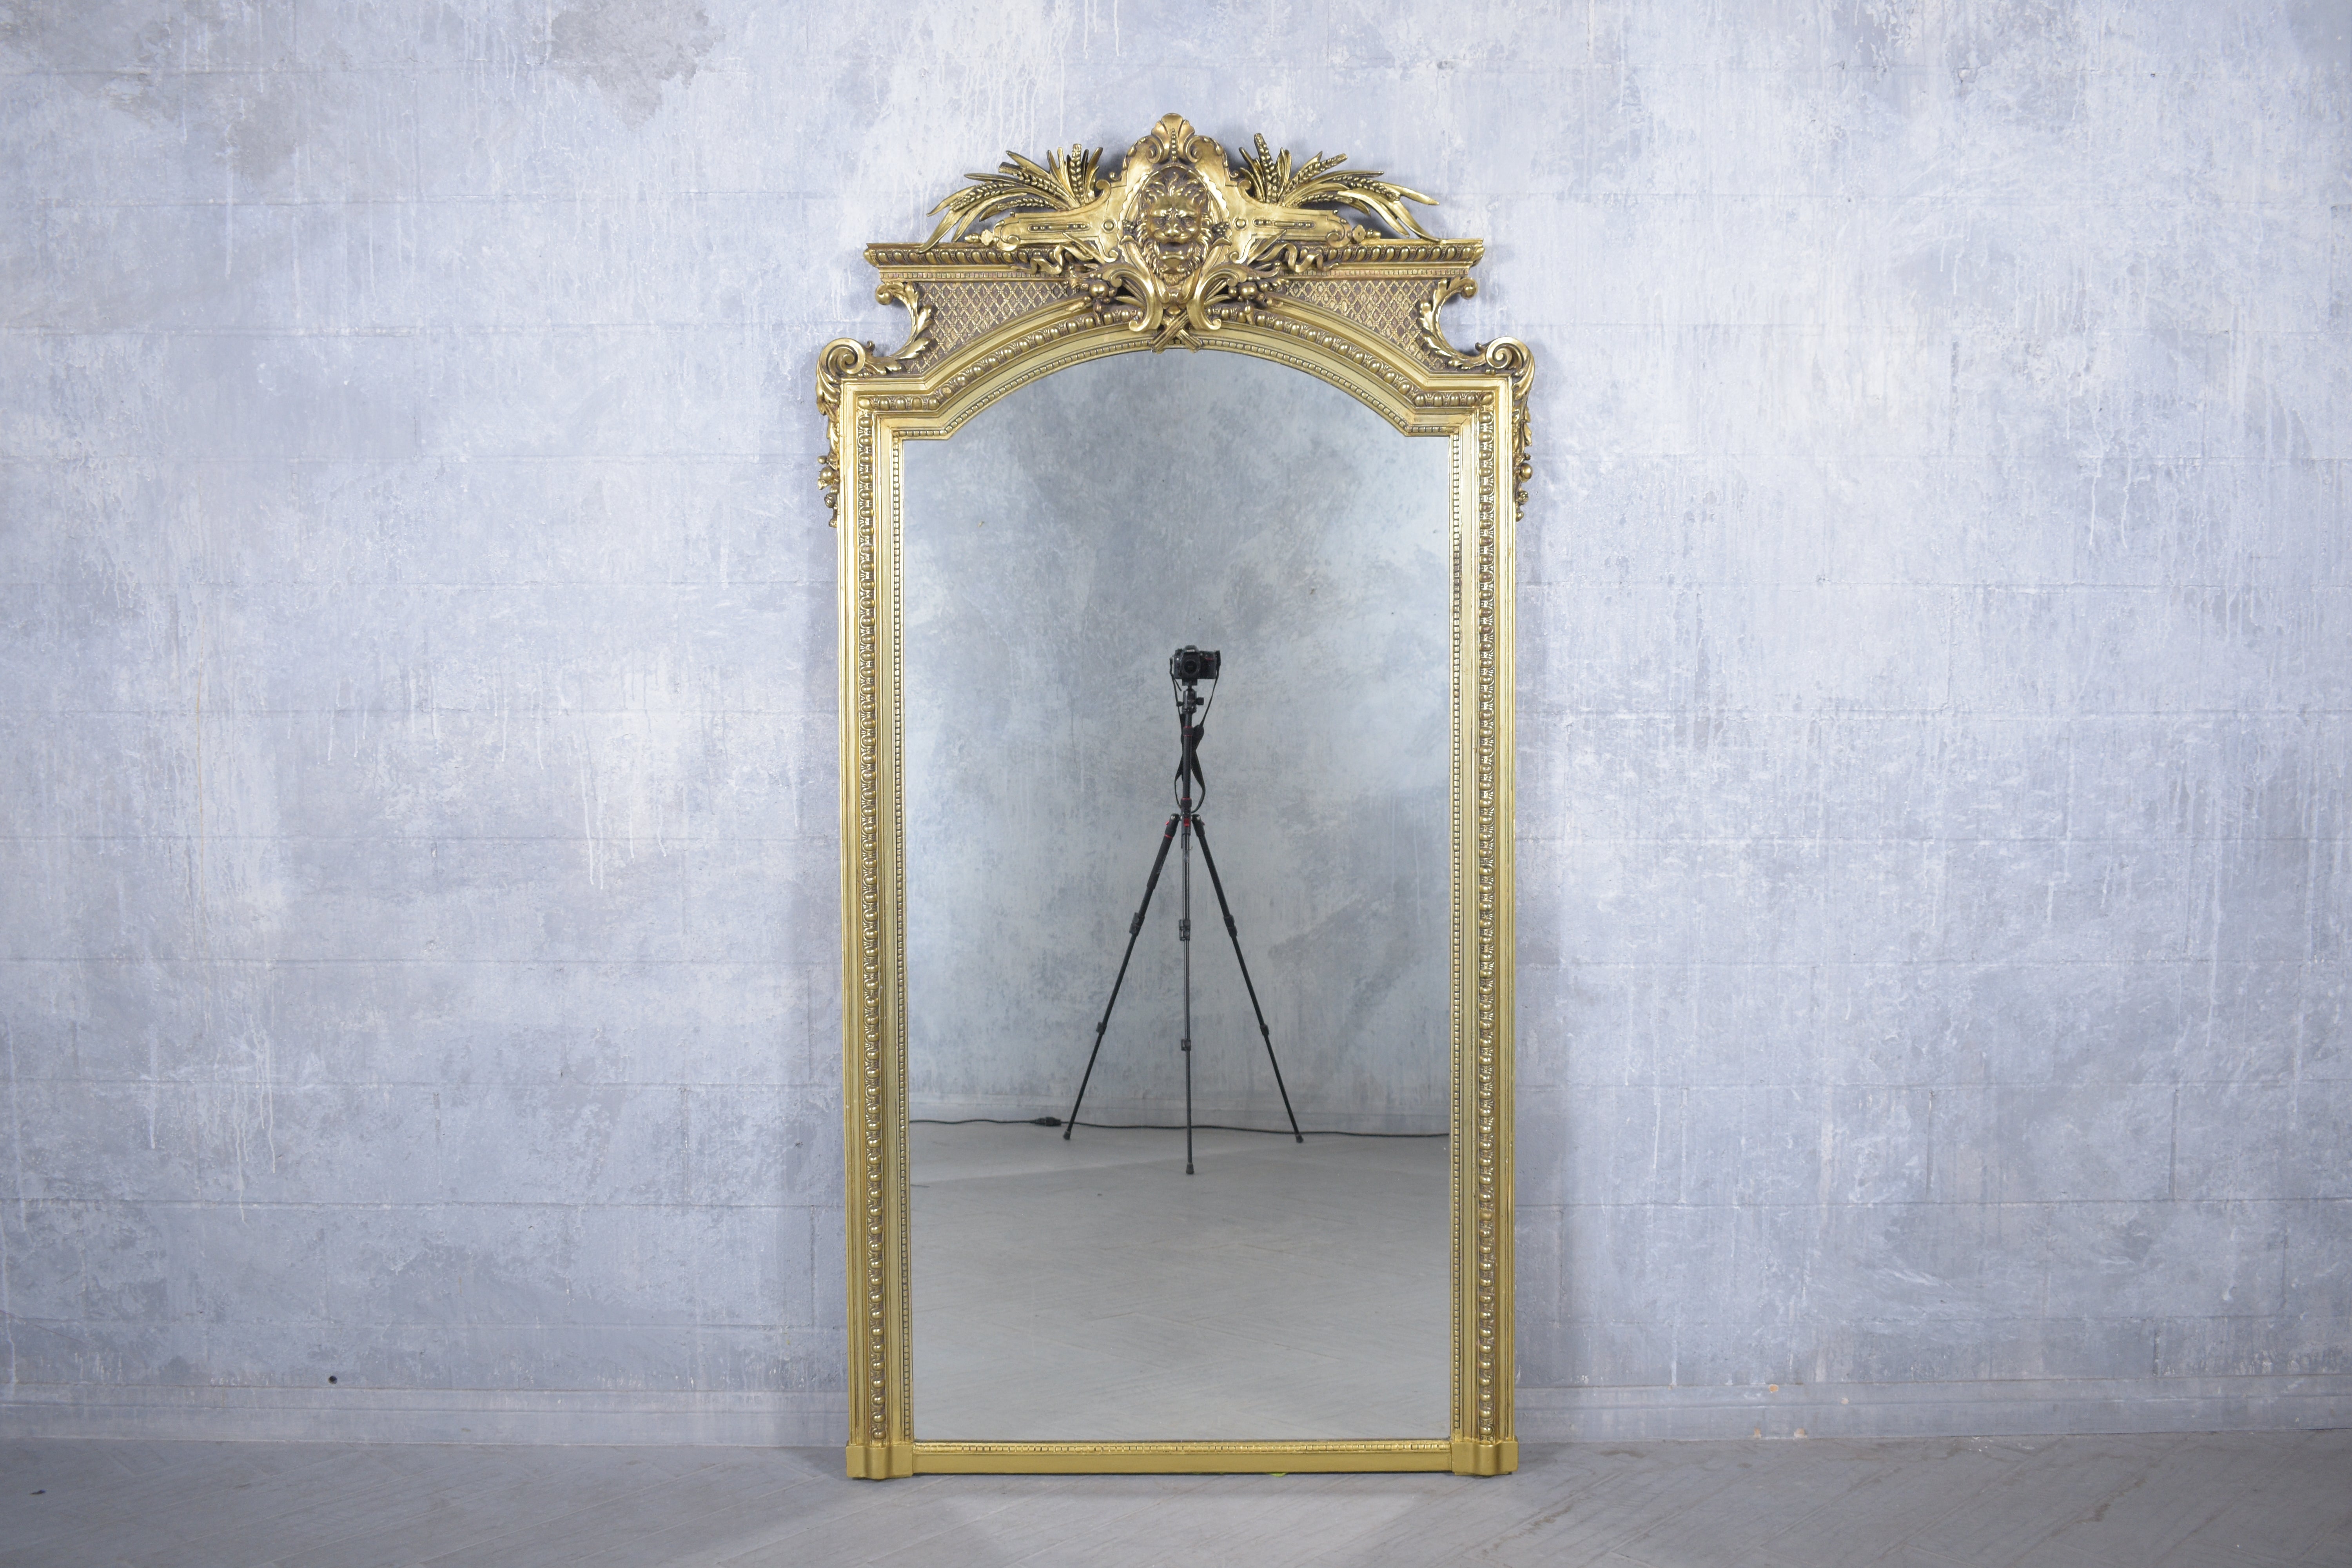 Step into the world of classic French elegance with our late 19th-century standing mirror, meticulously restored to showcase its artistry and craftsmanship. Made from premium solid wood and gesso, our expert craftsmen revived this exquisite mirror